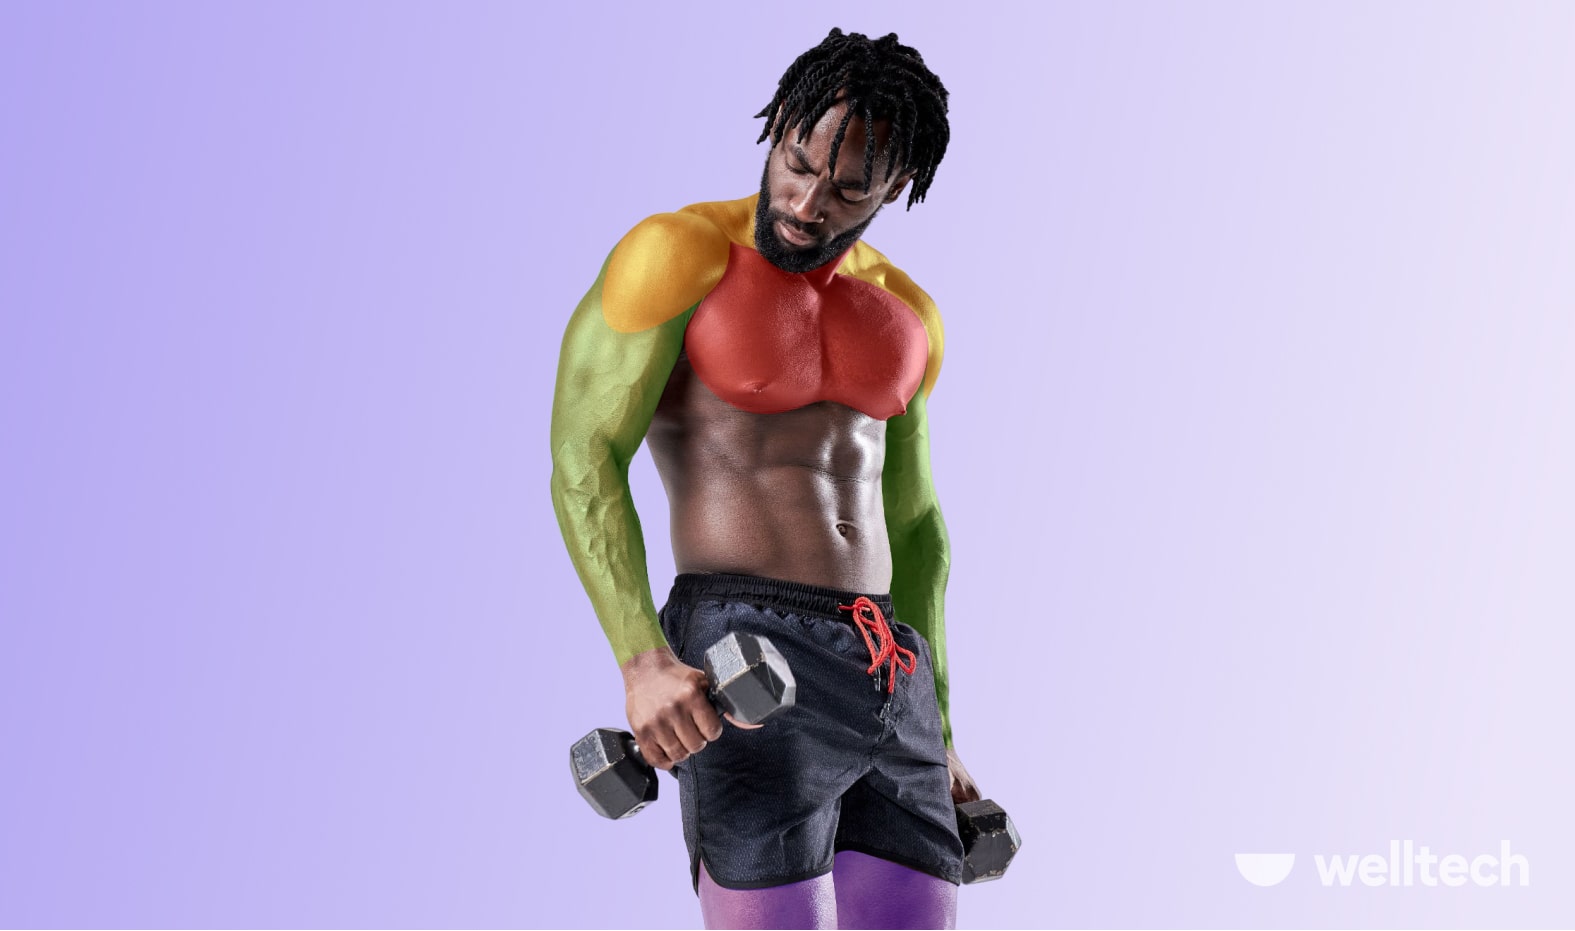 a man is working put with dumbbells, muscle groups highlighted in different colors_bro split